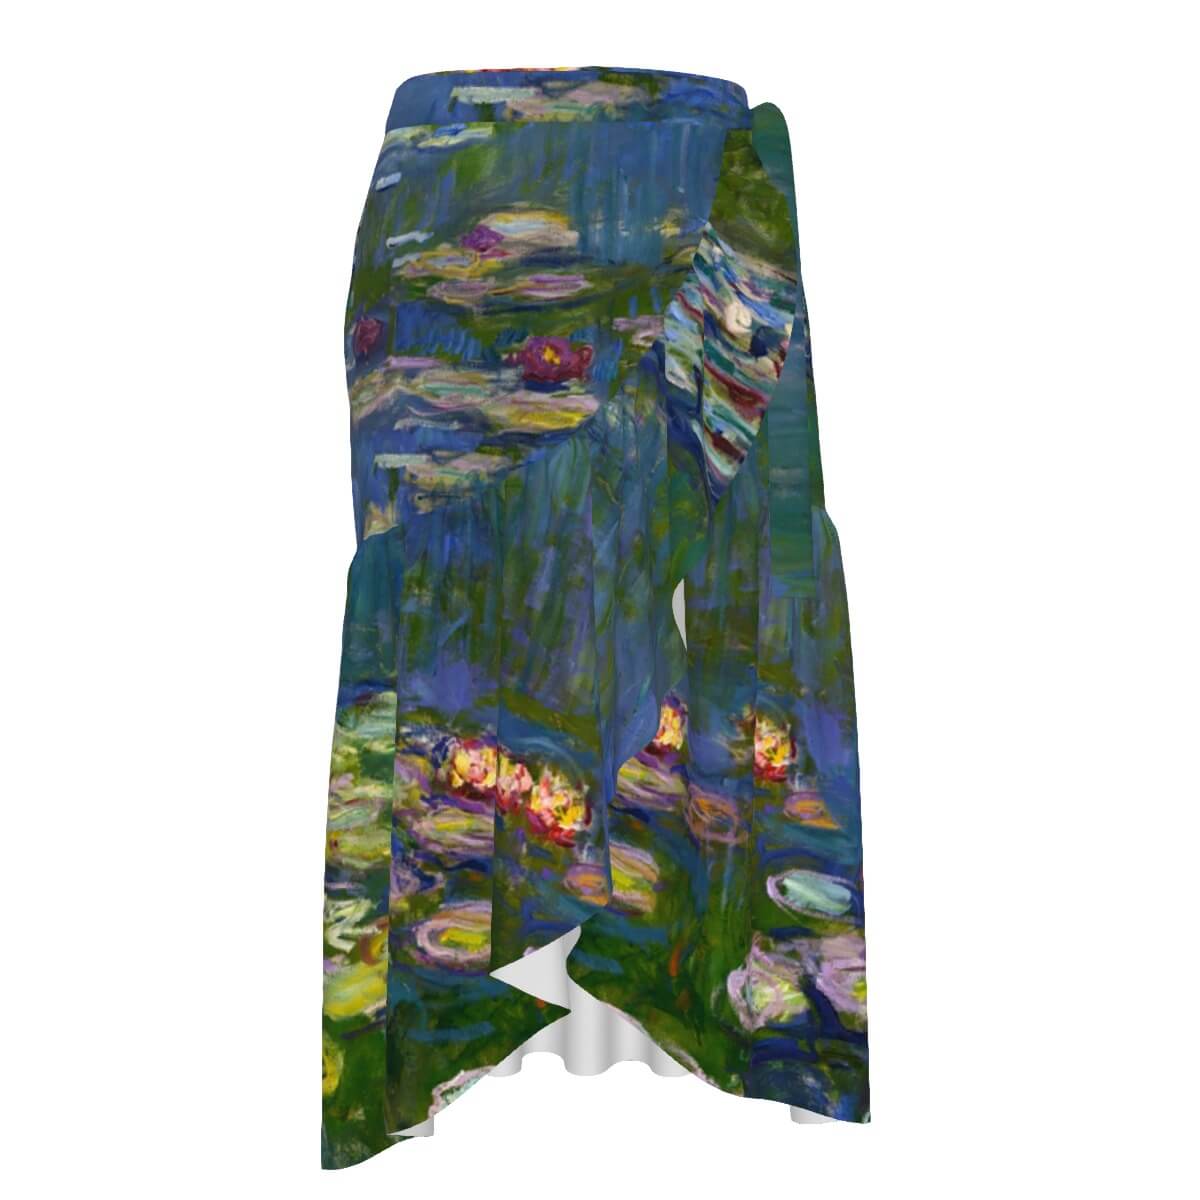 Inspired by Claude Monet's iconic Water Lilies painting